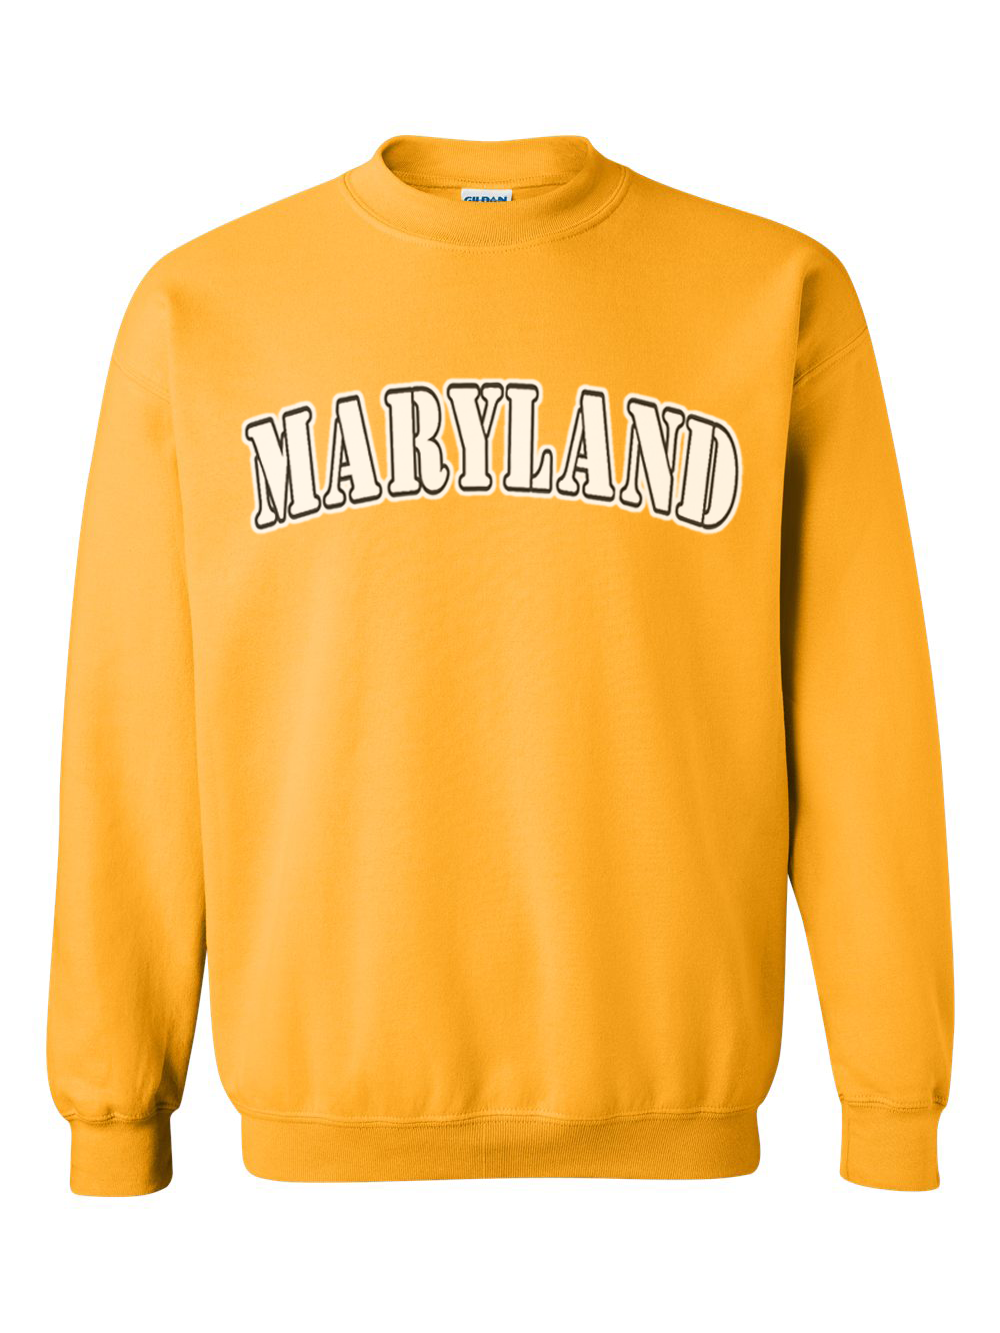 maryland-gifts-white-plain-text-crewneck-sweater-gold